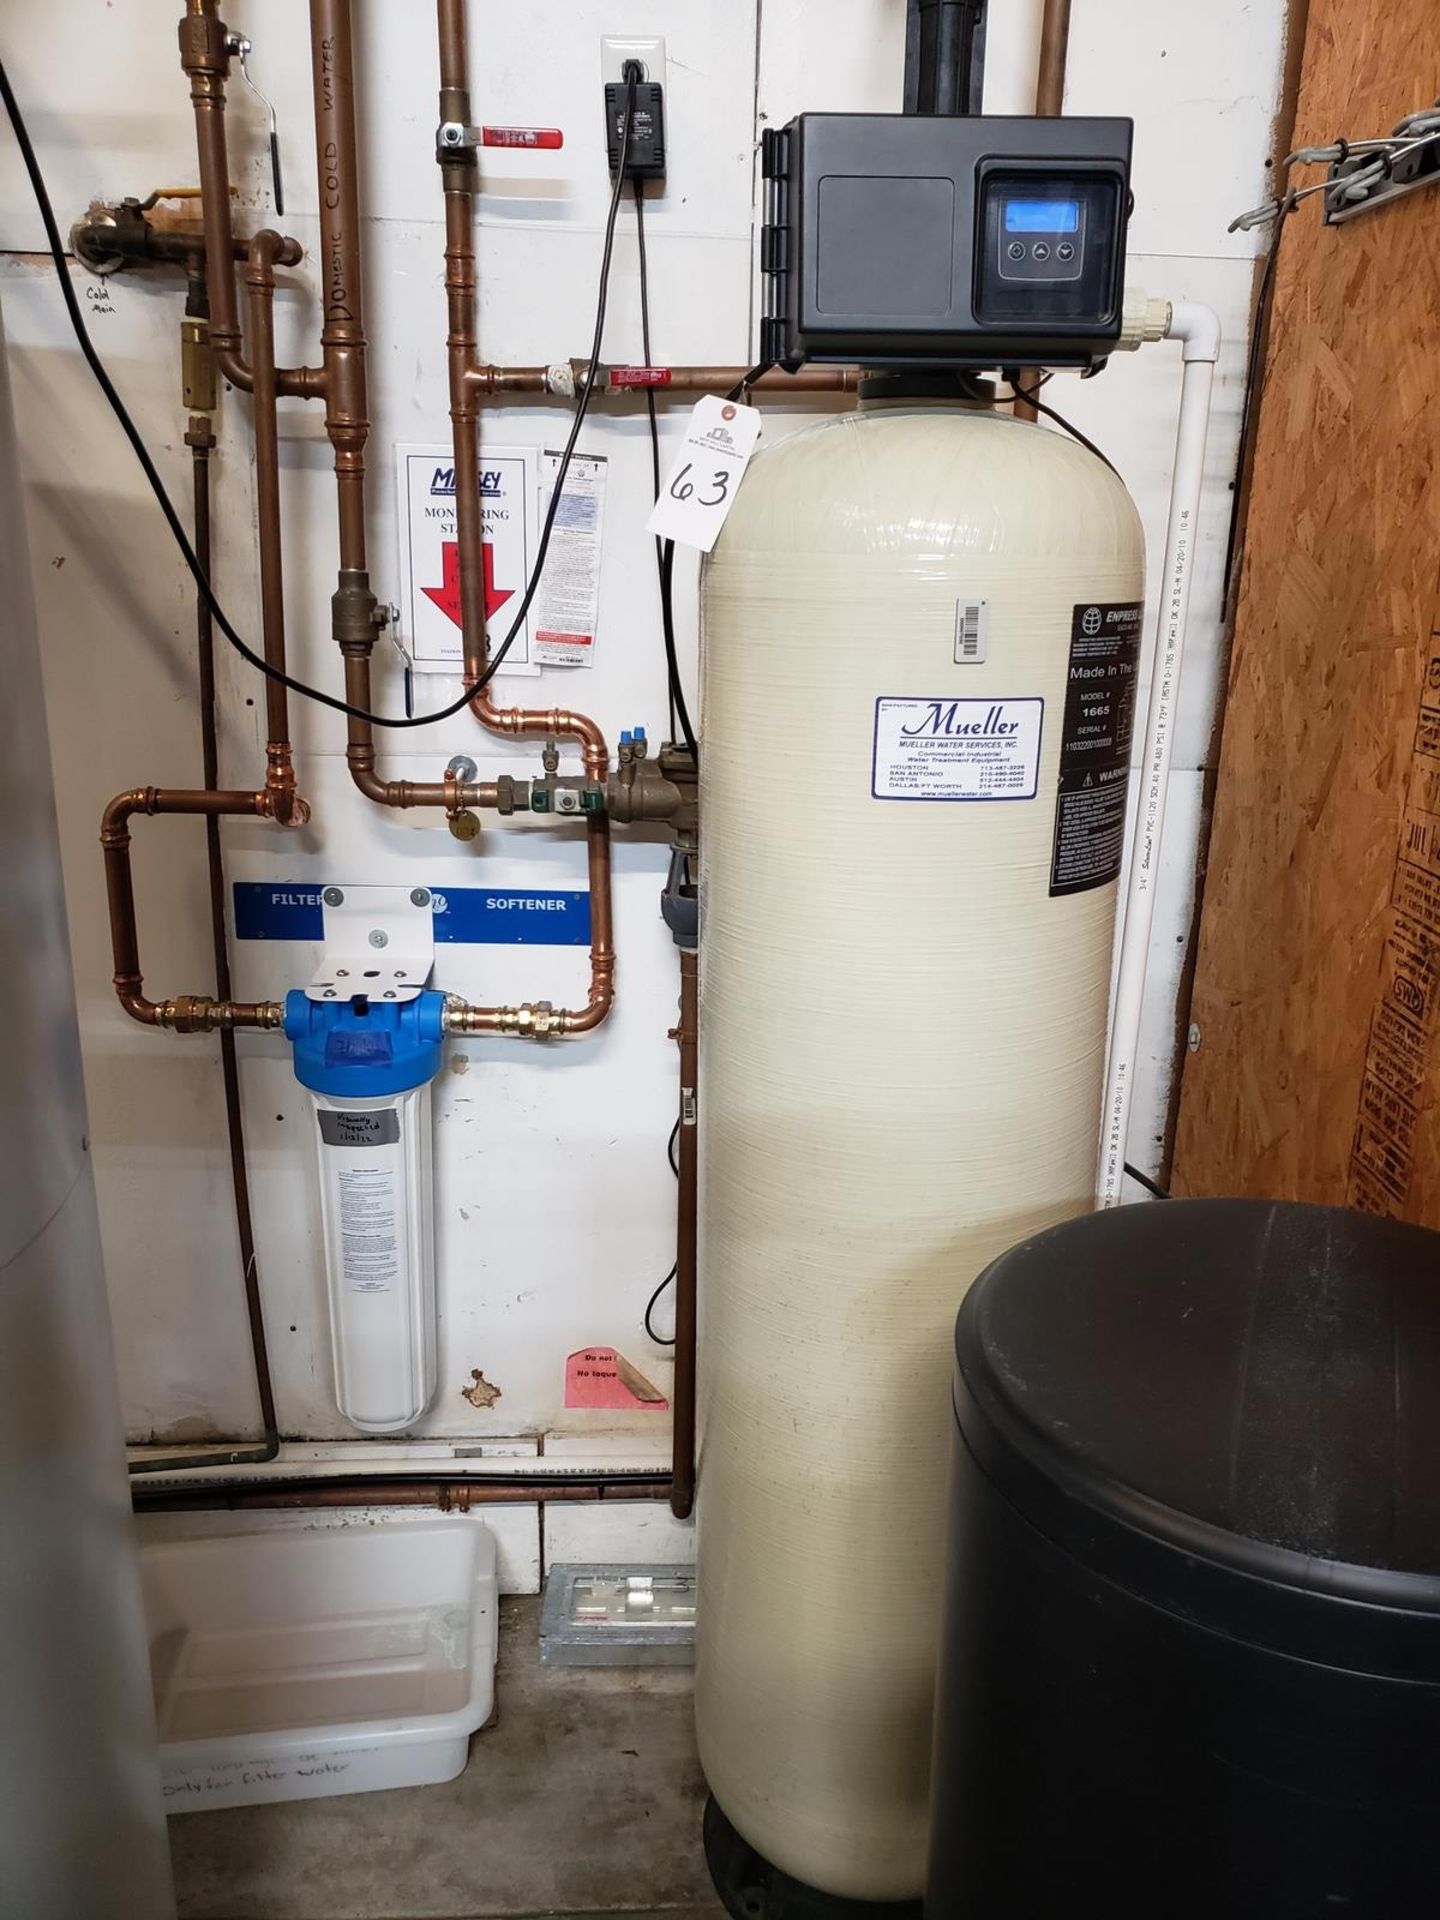 Water Softener/Filtration System | Rig Fee: $125